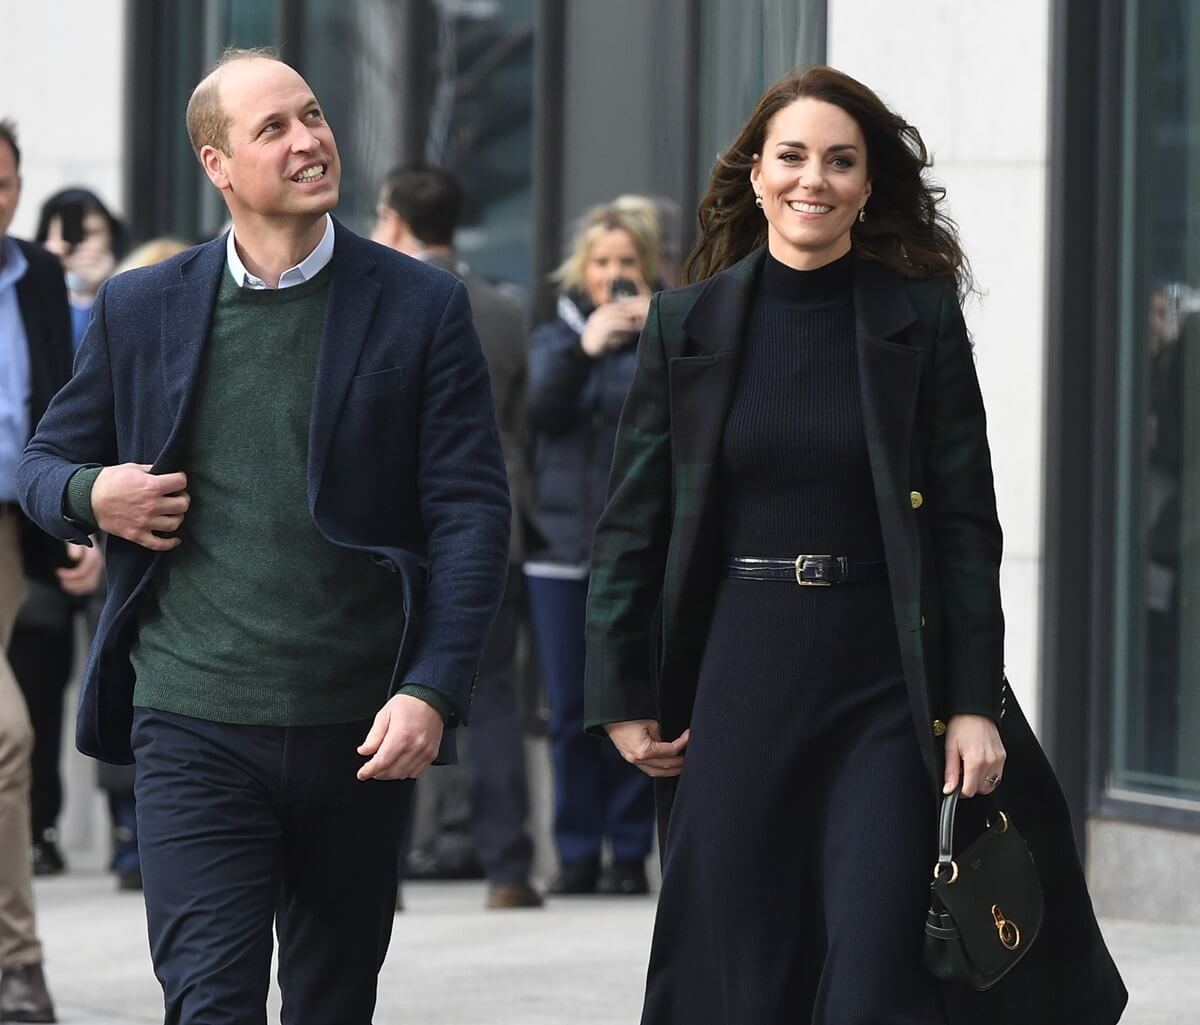 Prince William and Kate Middleton visit Merseyside to thank those working in healthcare and mental health support for their work